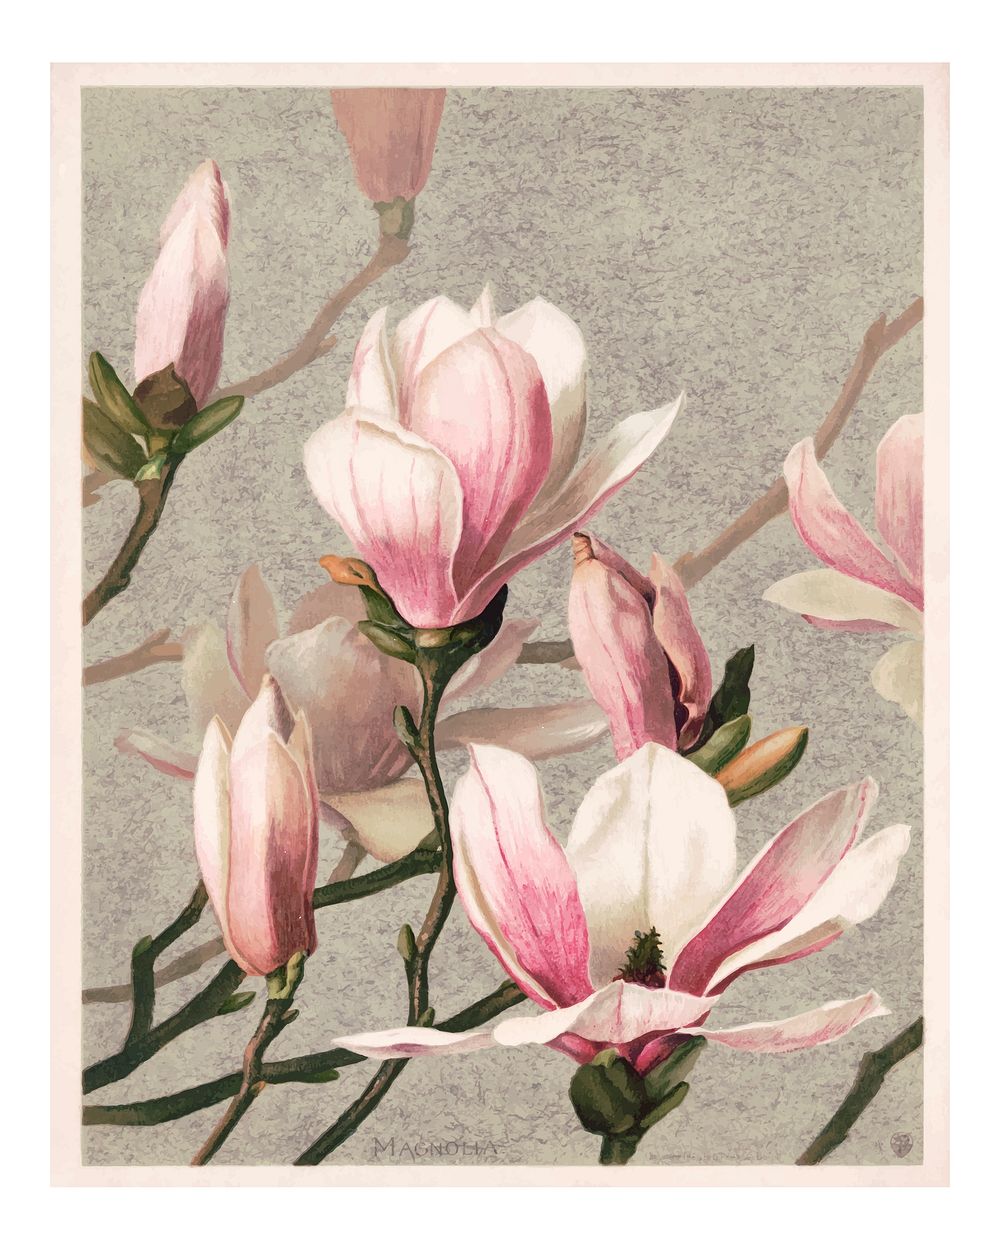 Magnolia poster, vintage art print (1886) in high resolution by L. Prang & Co. Original from The Library of Congress.…